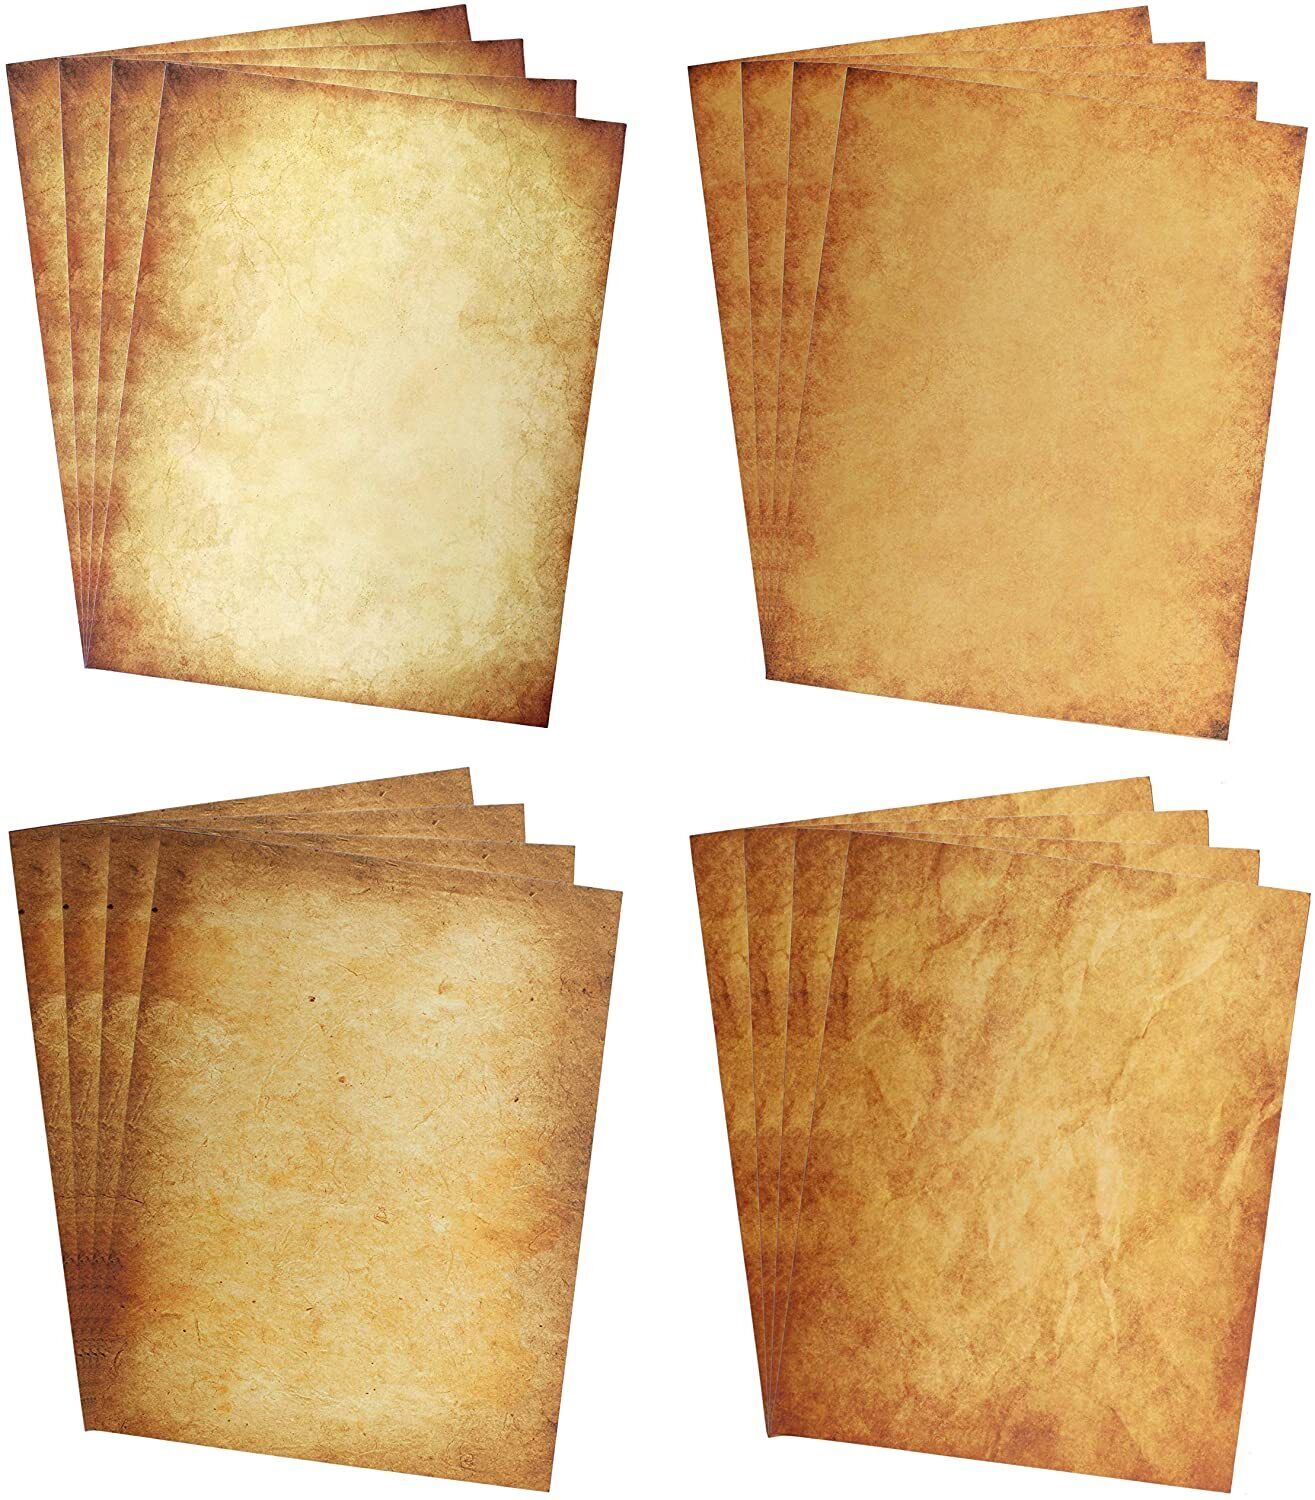 Antique Design Stationery, 8 1/2 x 11 inch, 124 Old Style Paper Sheets